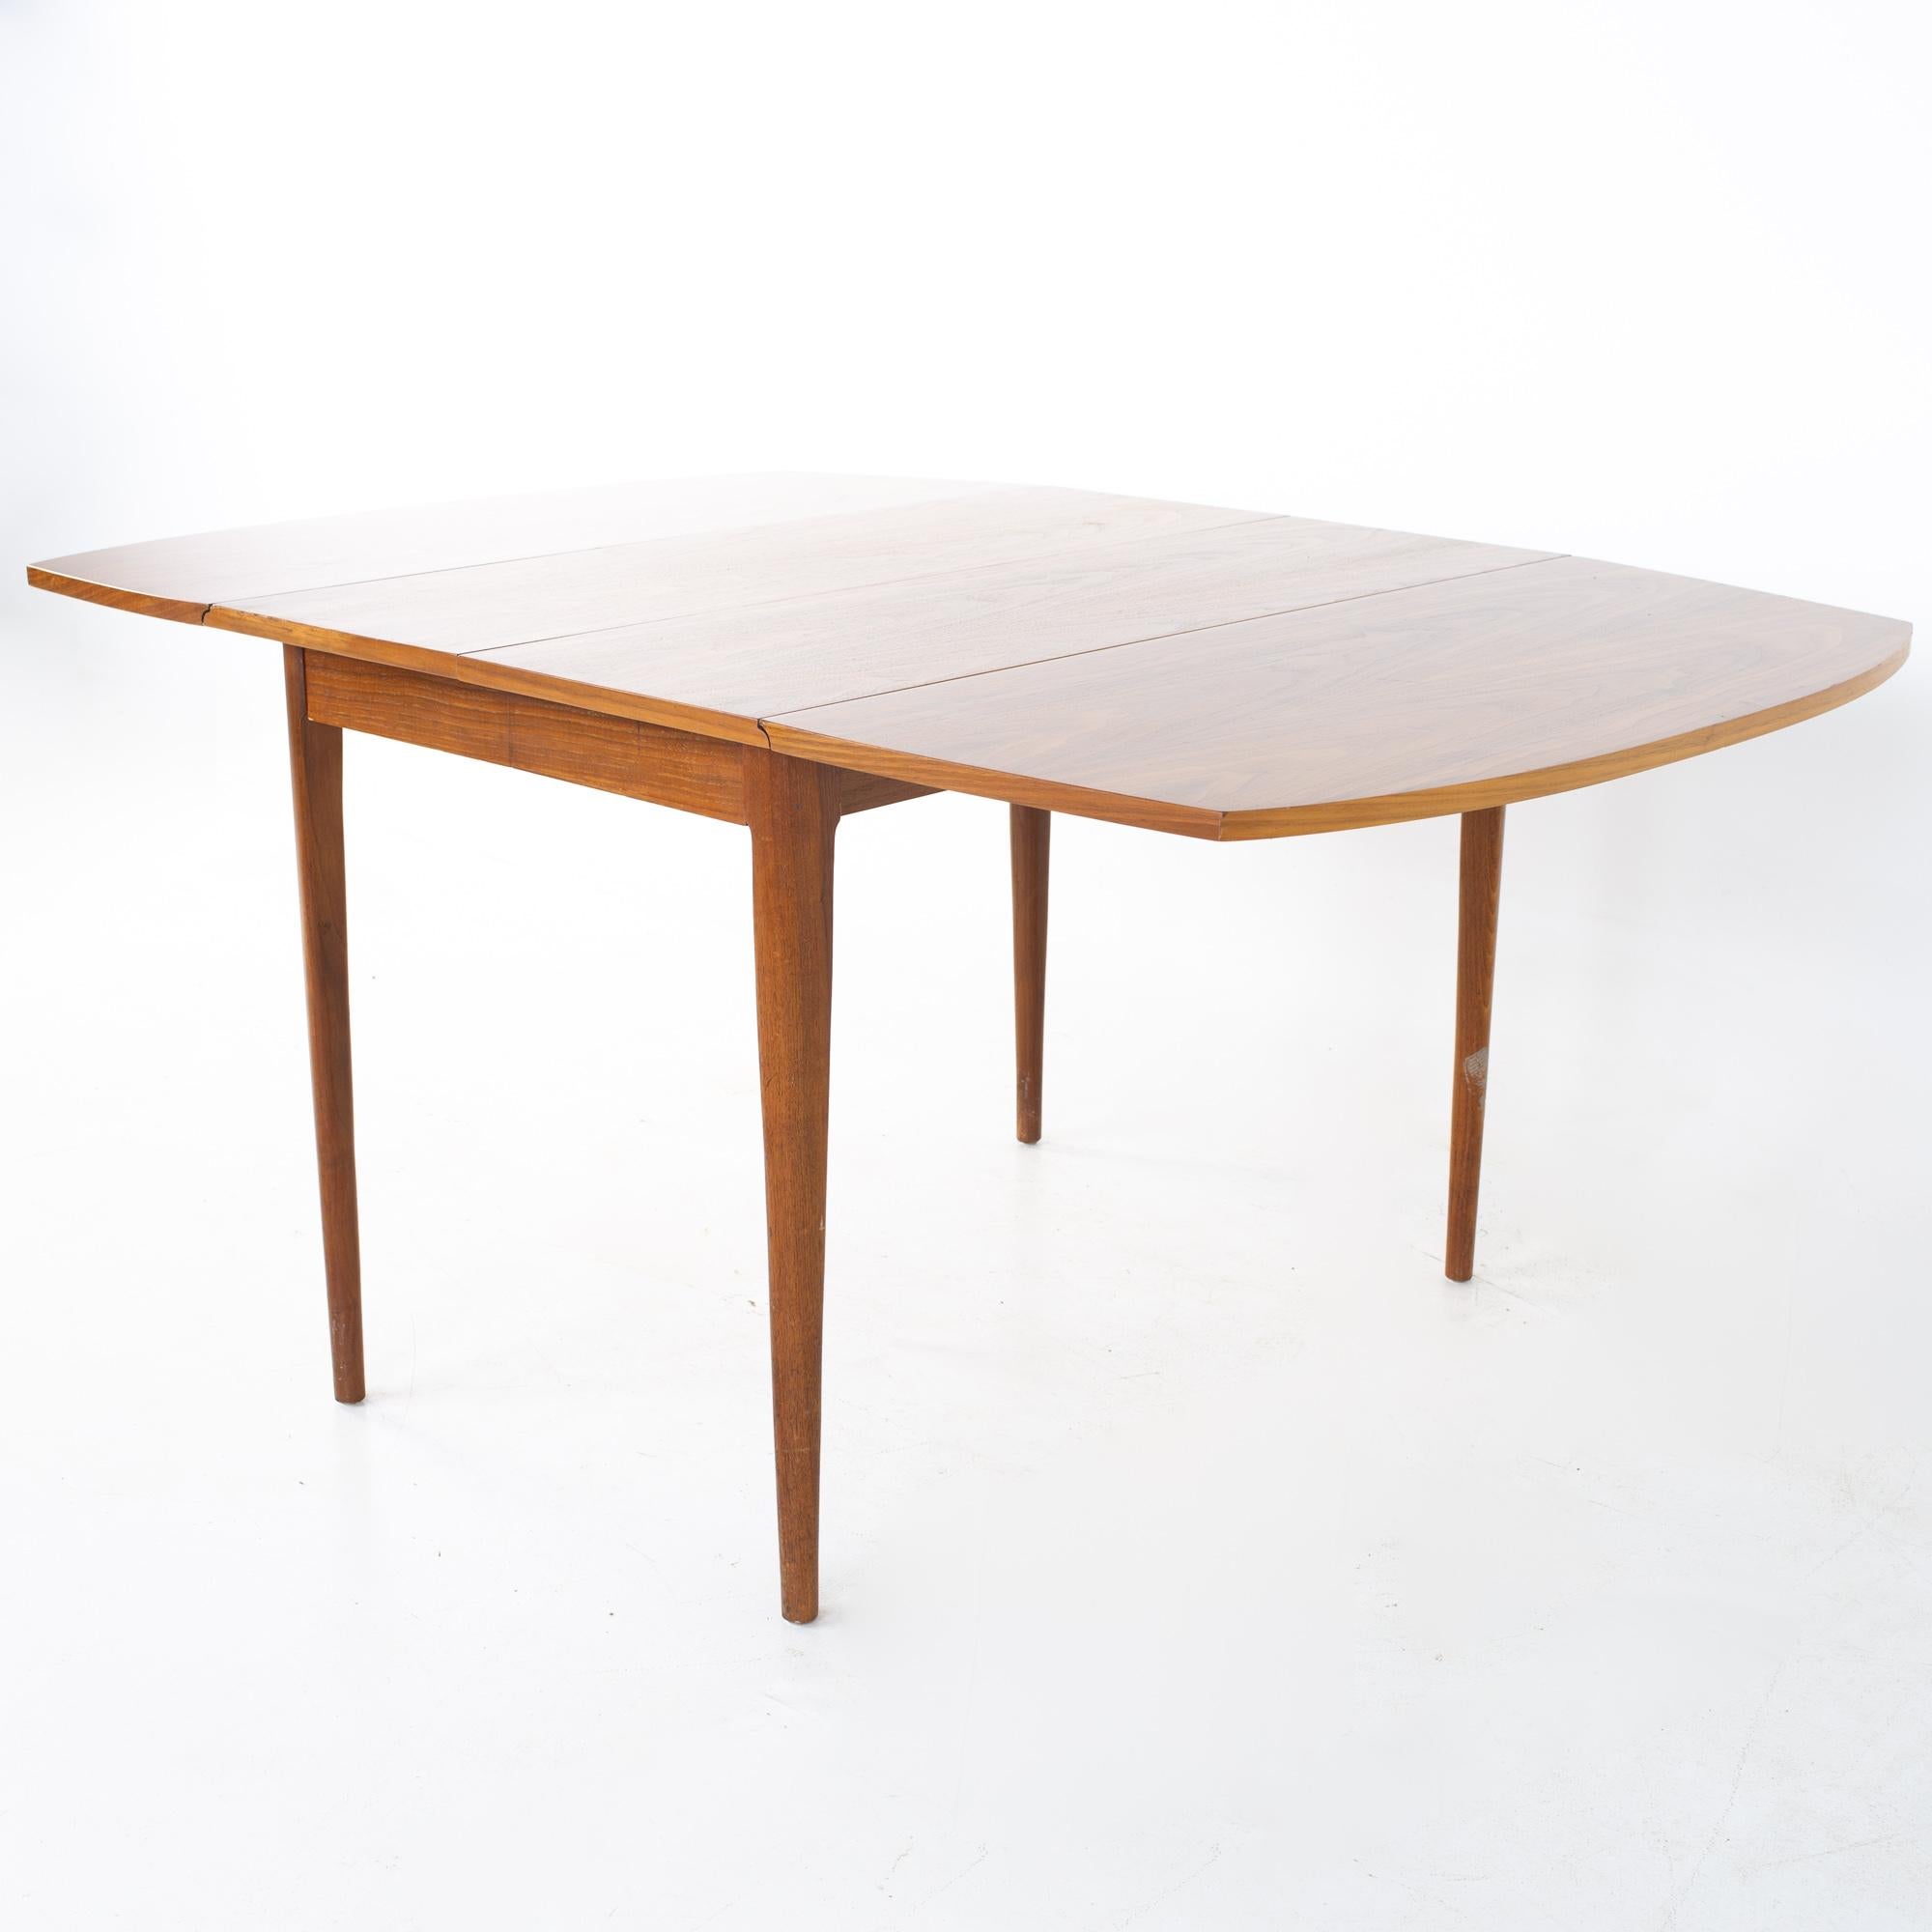 Kipp Stewart for Drexel Declaration Mid Century walnut drop leaf dining table
Table measures: 27 wide x 42 deep x 29 inches high; each leaf is 18 inches wide, making a maximum table width of 63 inches when both leaves are used. This table has a